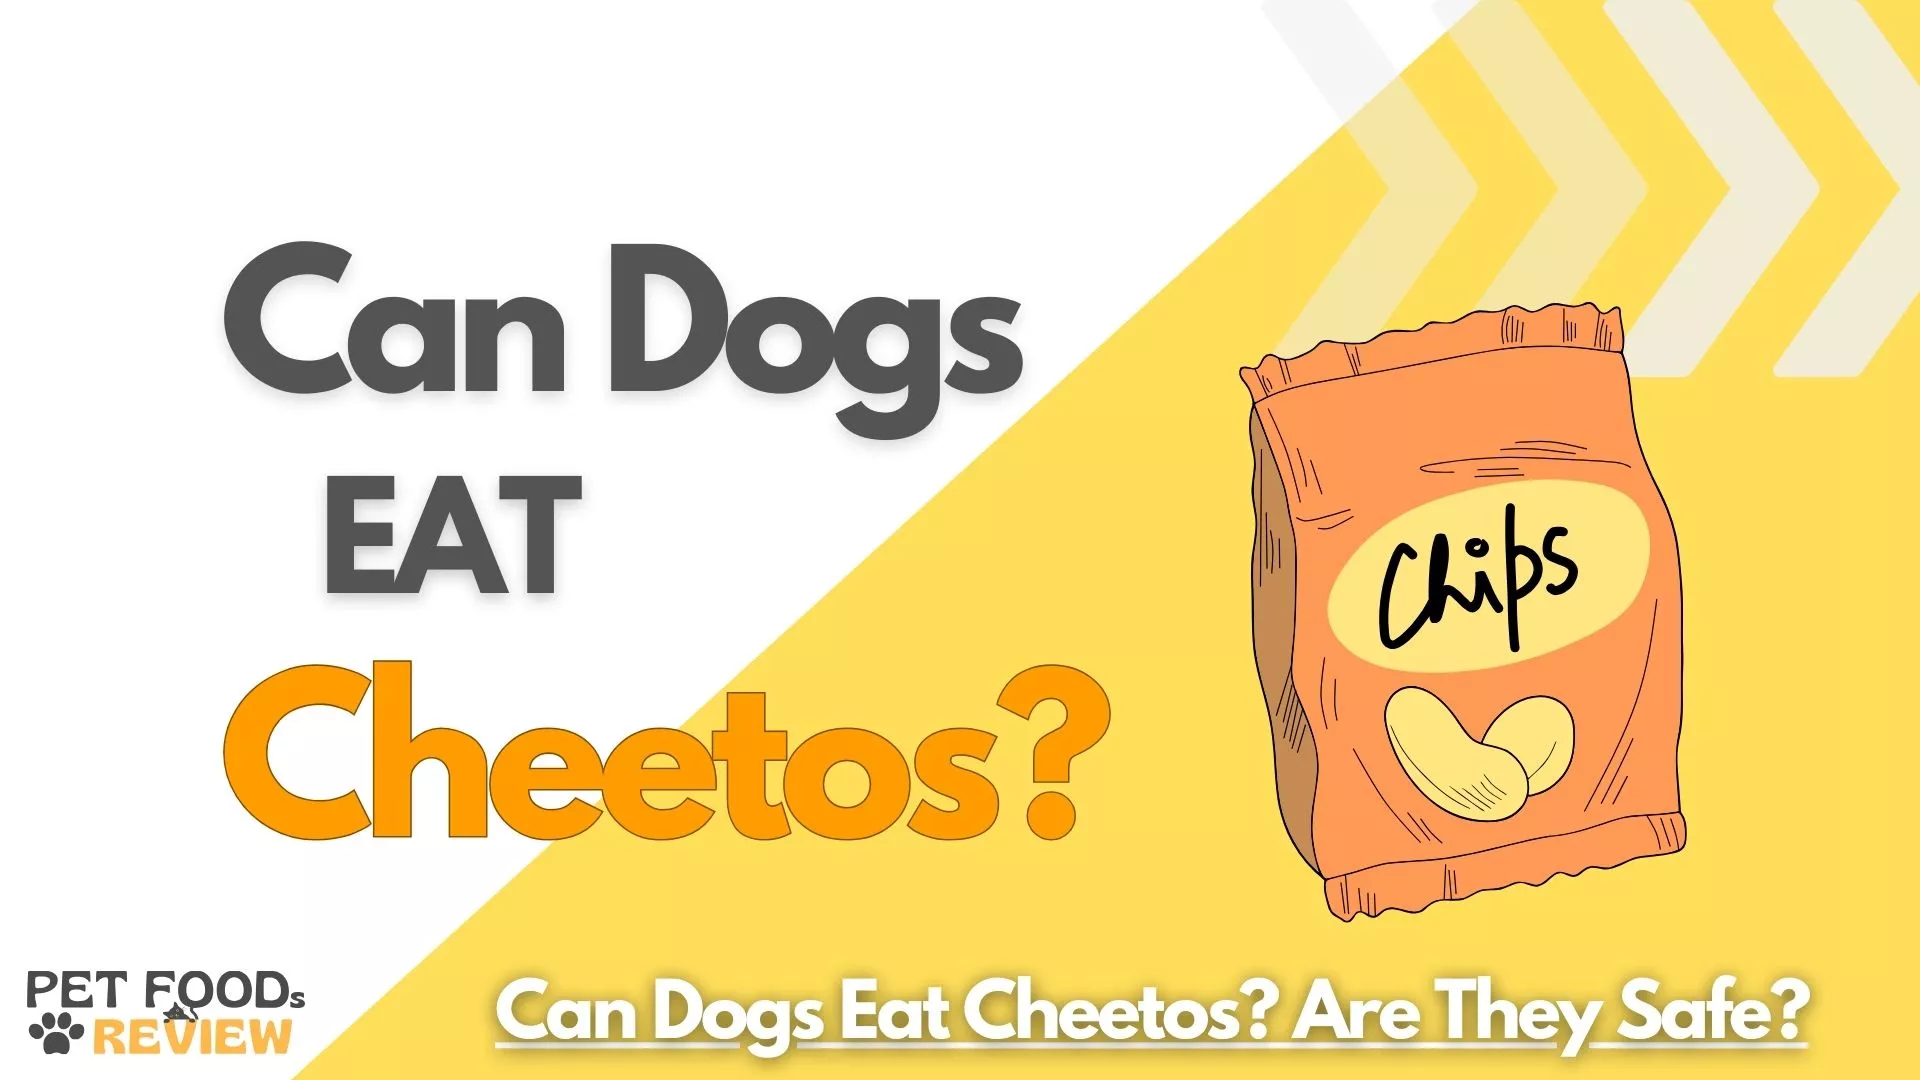 Can Dogs eat Cheetos?